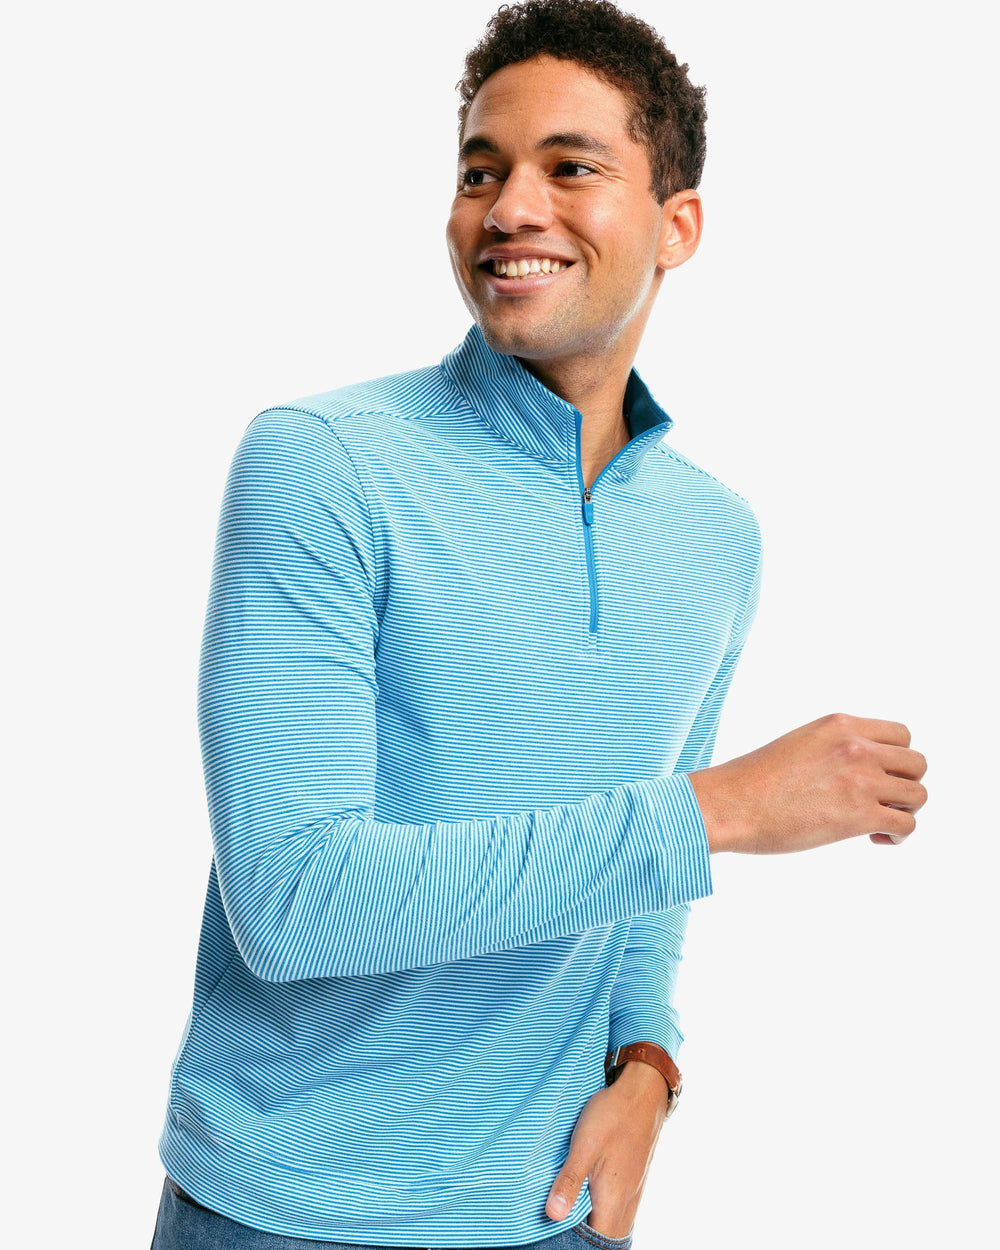 The front of the Men's Cruiser Heather Micro Striped Performance Quarter Zip Pullover by Southern Tide - Heather Blue Sapphire